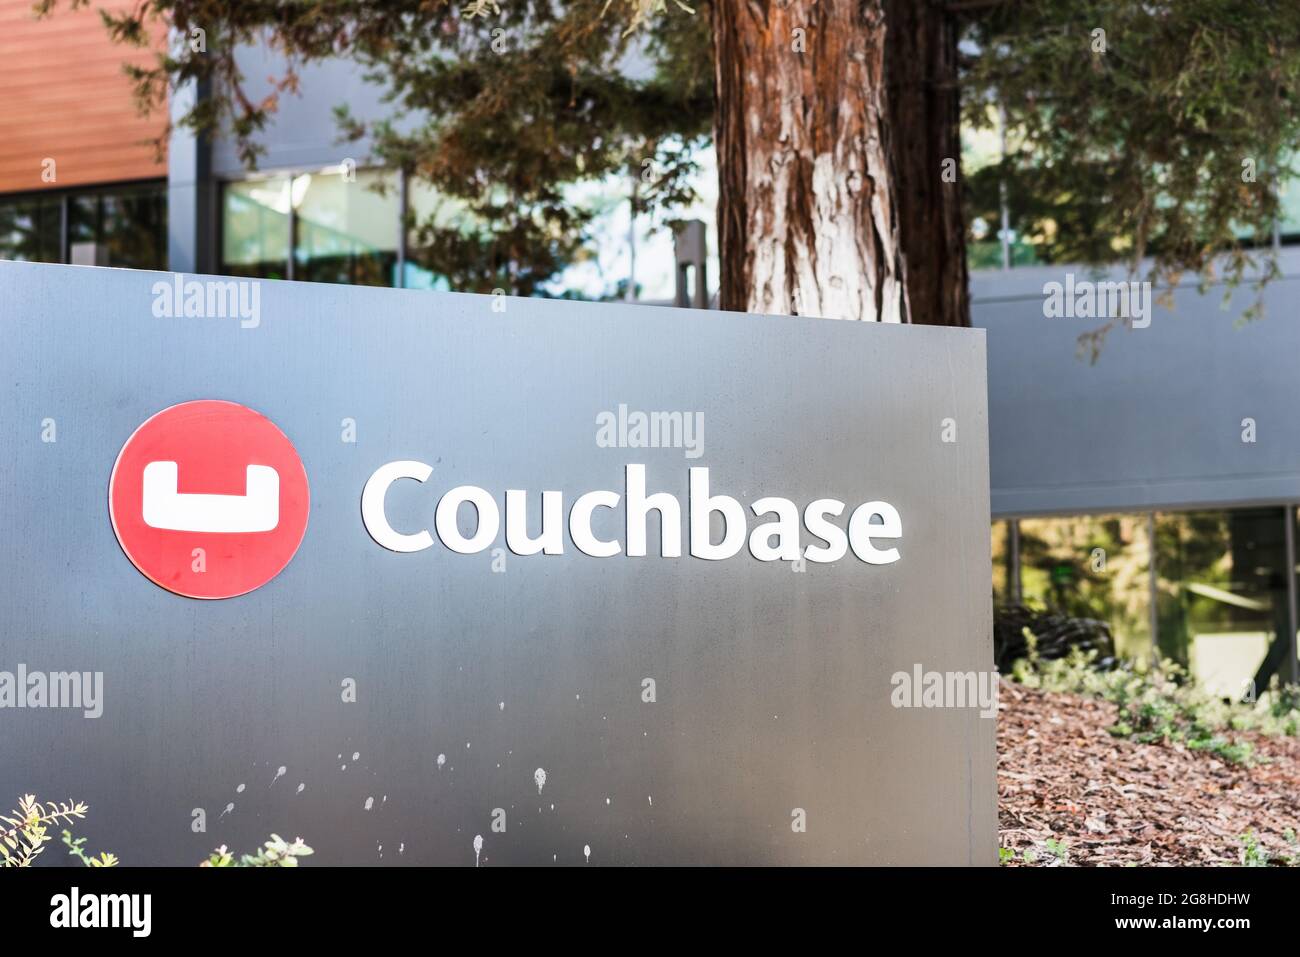 Sep 24, 2020 Santa Clara / CA / USA - Couchbase logo at their headquarters in Silicon Valley; Couchbase Inc offers cloud database for business applica Stock Photo